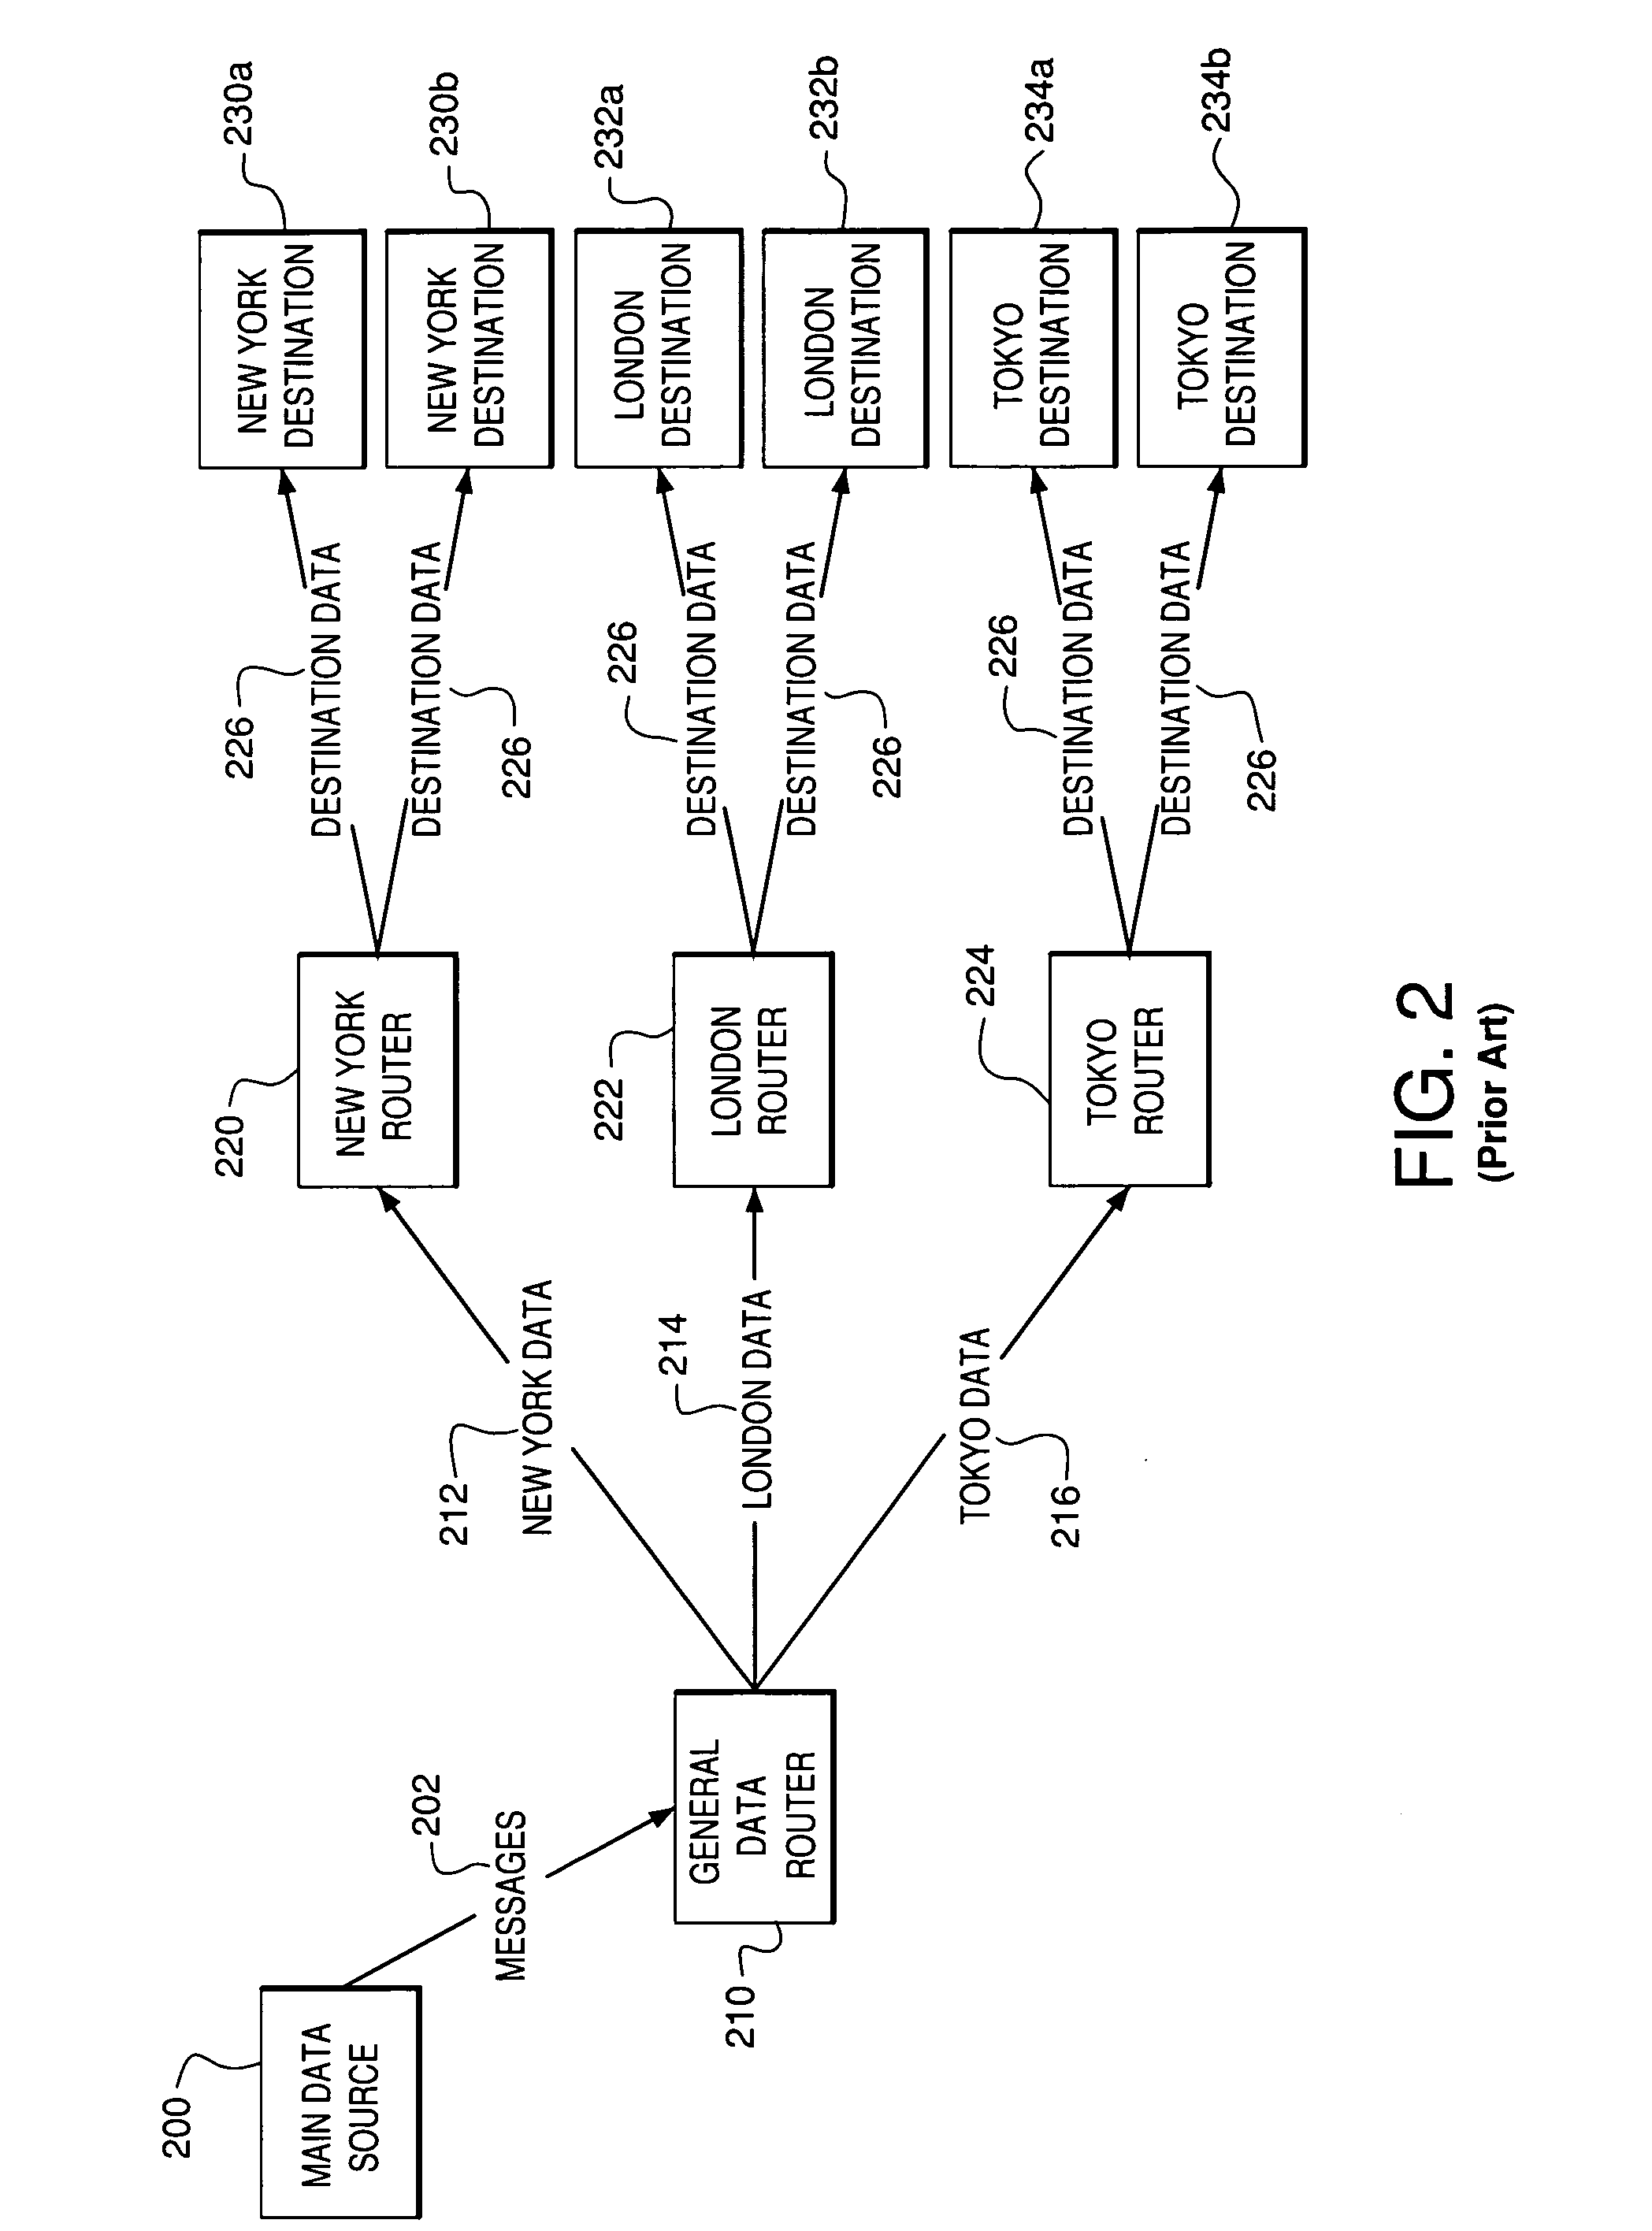 System and method for message processing and routing